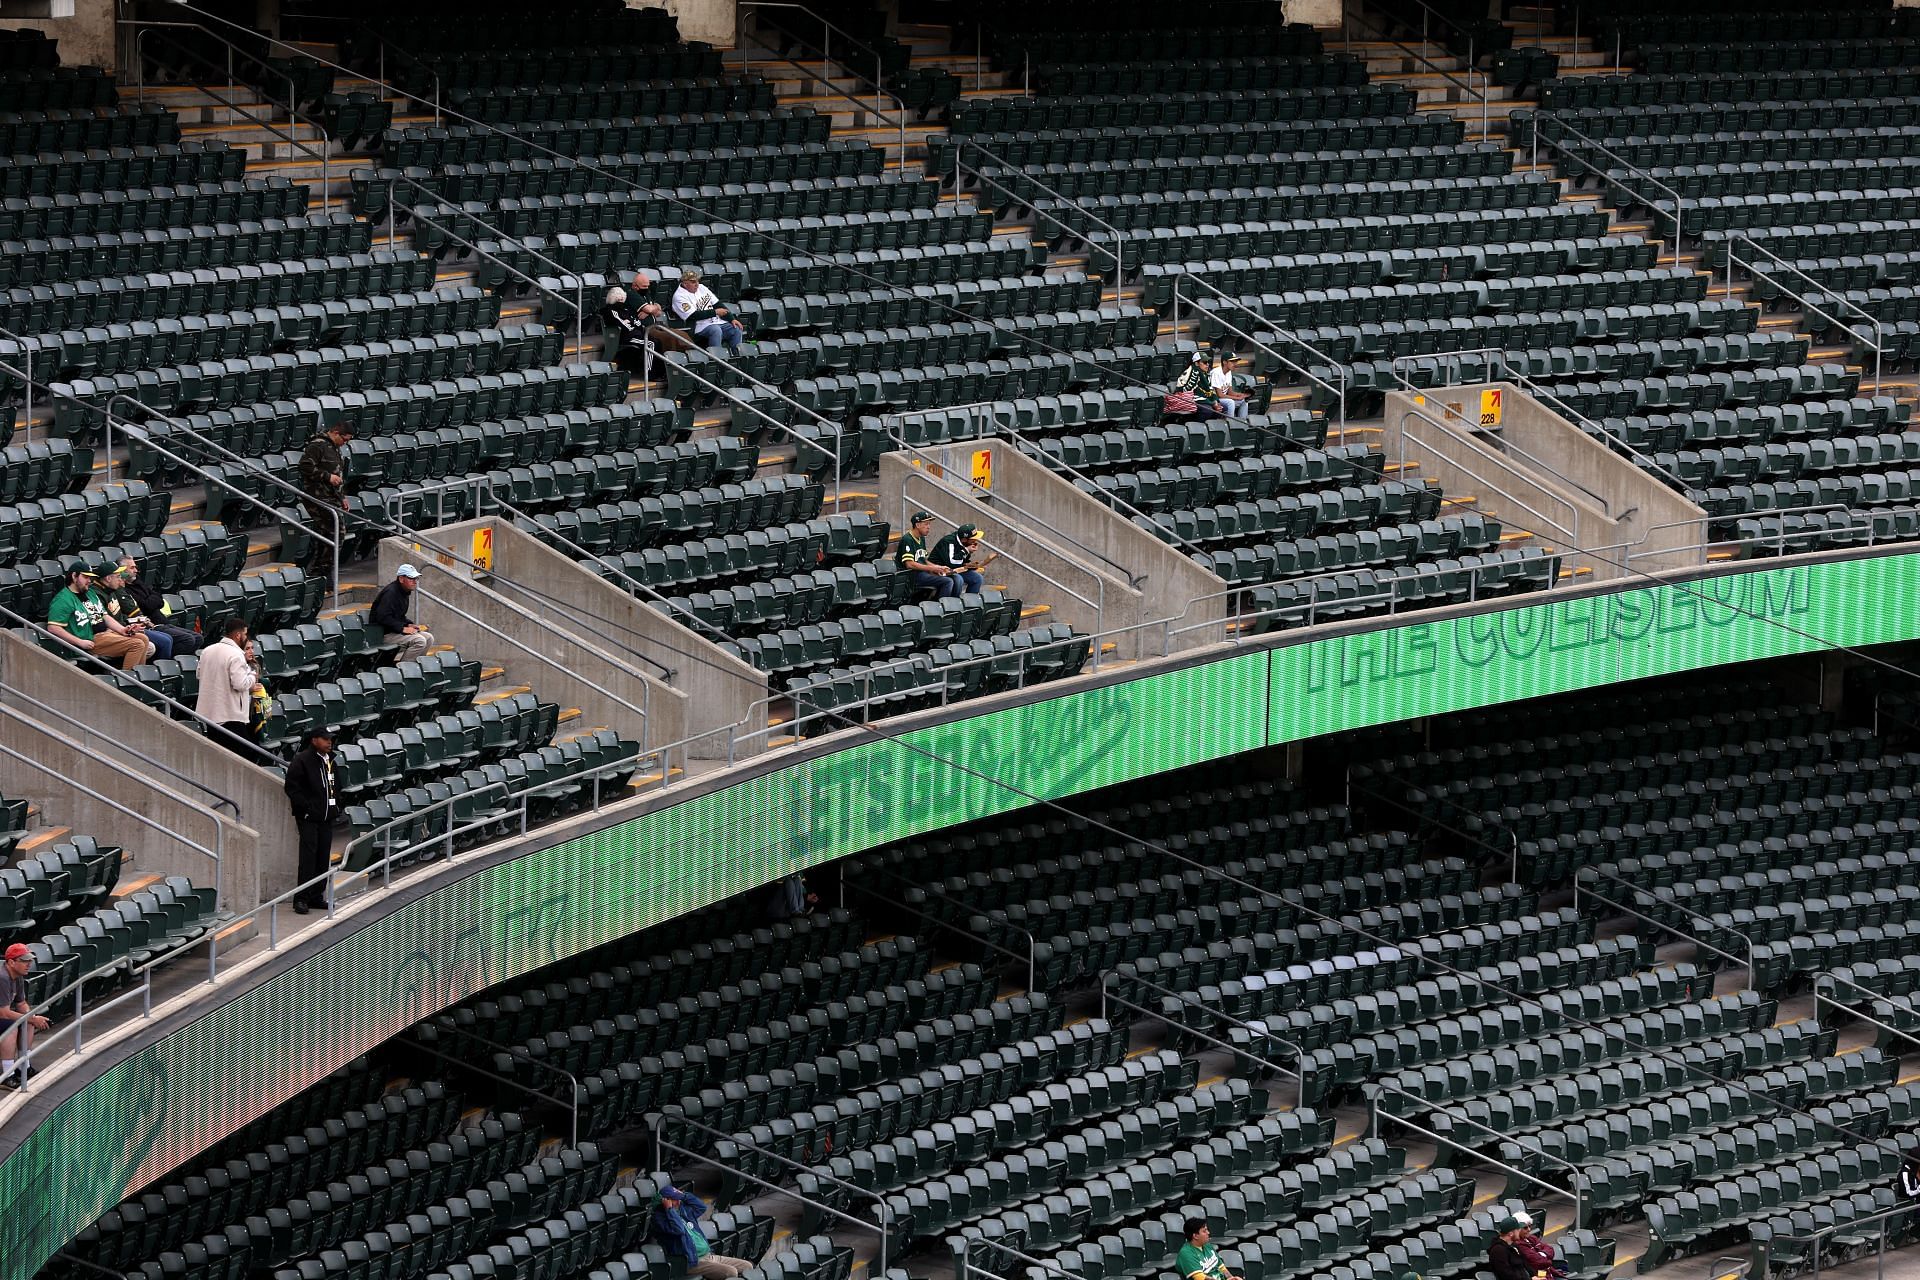 Rows of seats sit empty as the Oakland Athletics play the Texas Rangers at RingCentral Coliseum